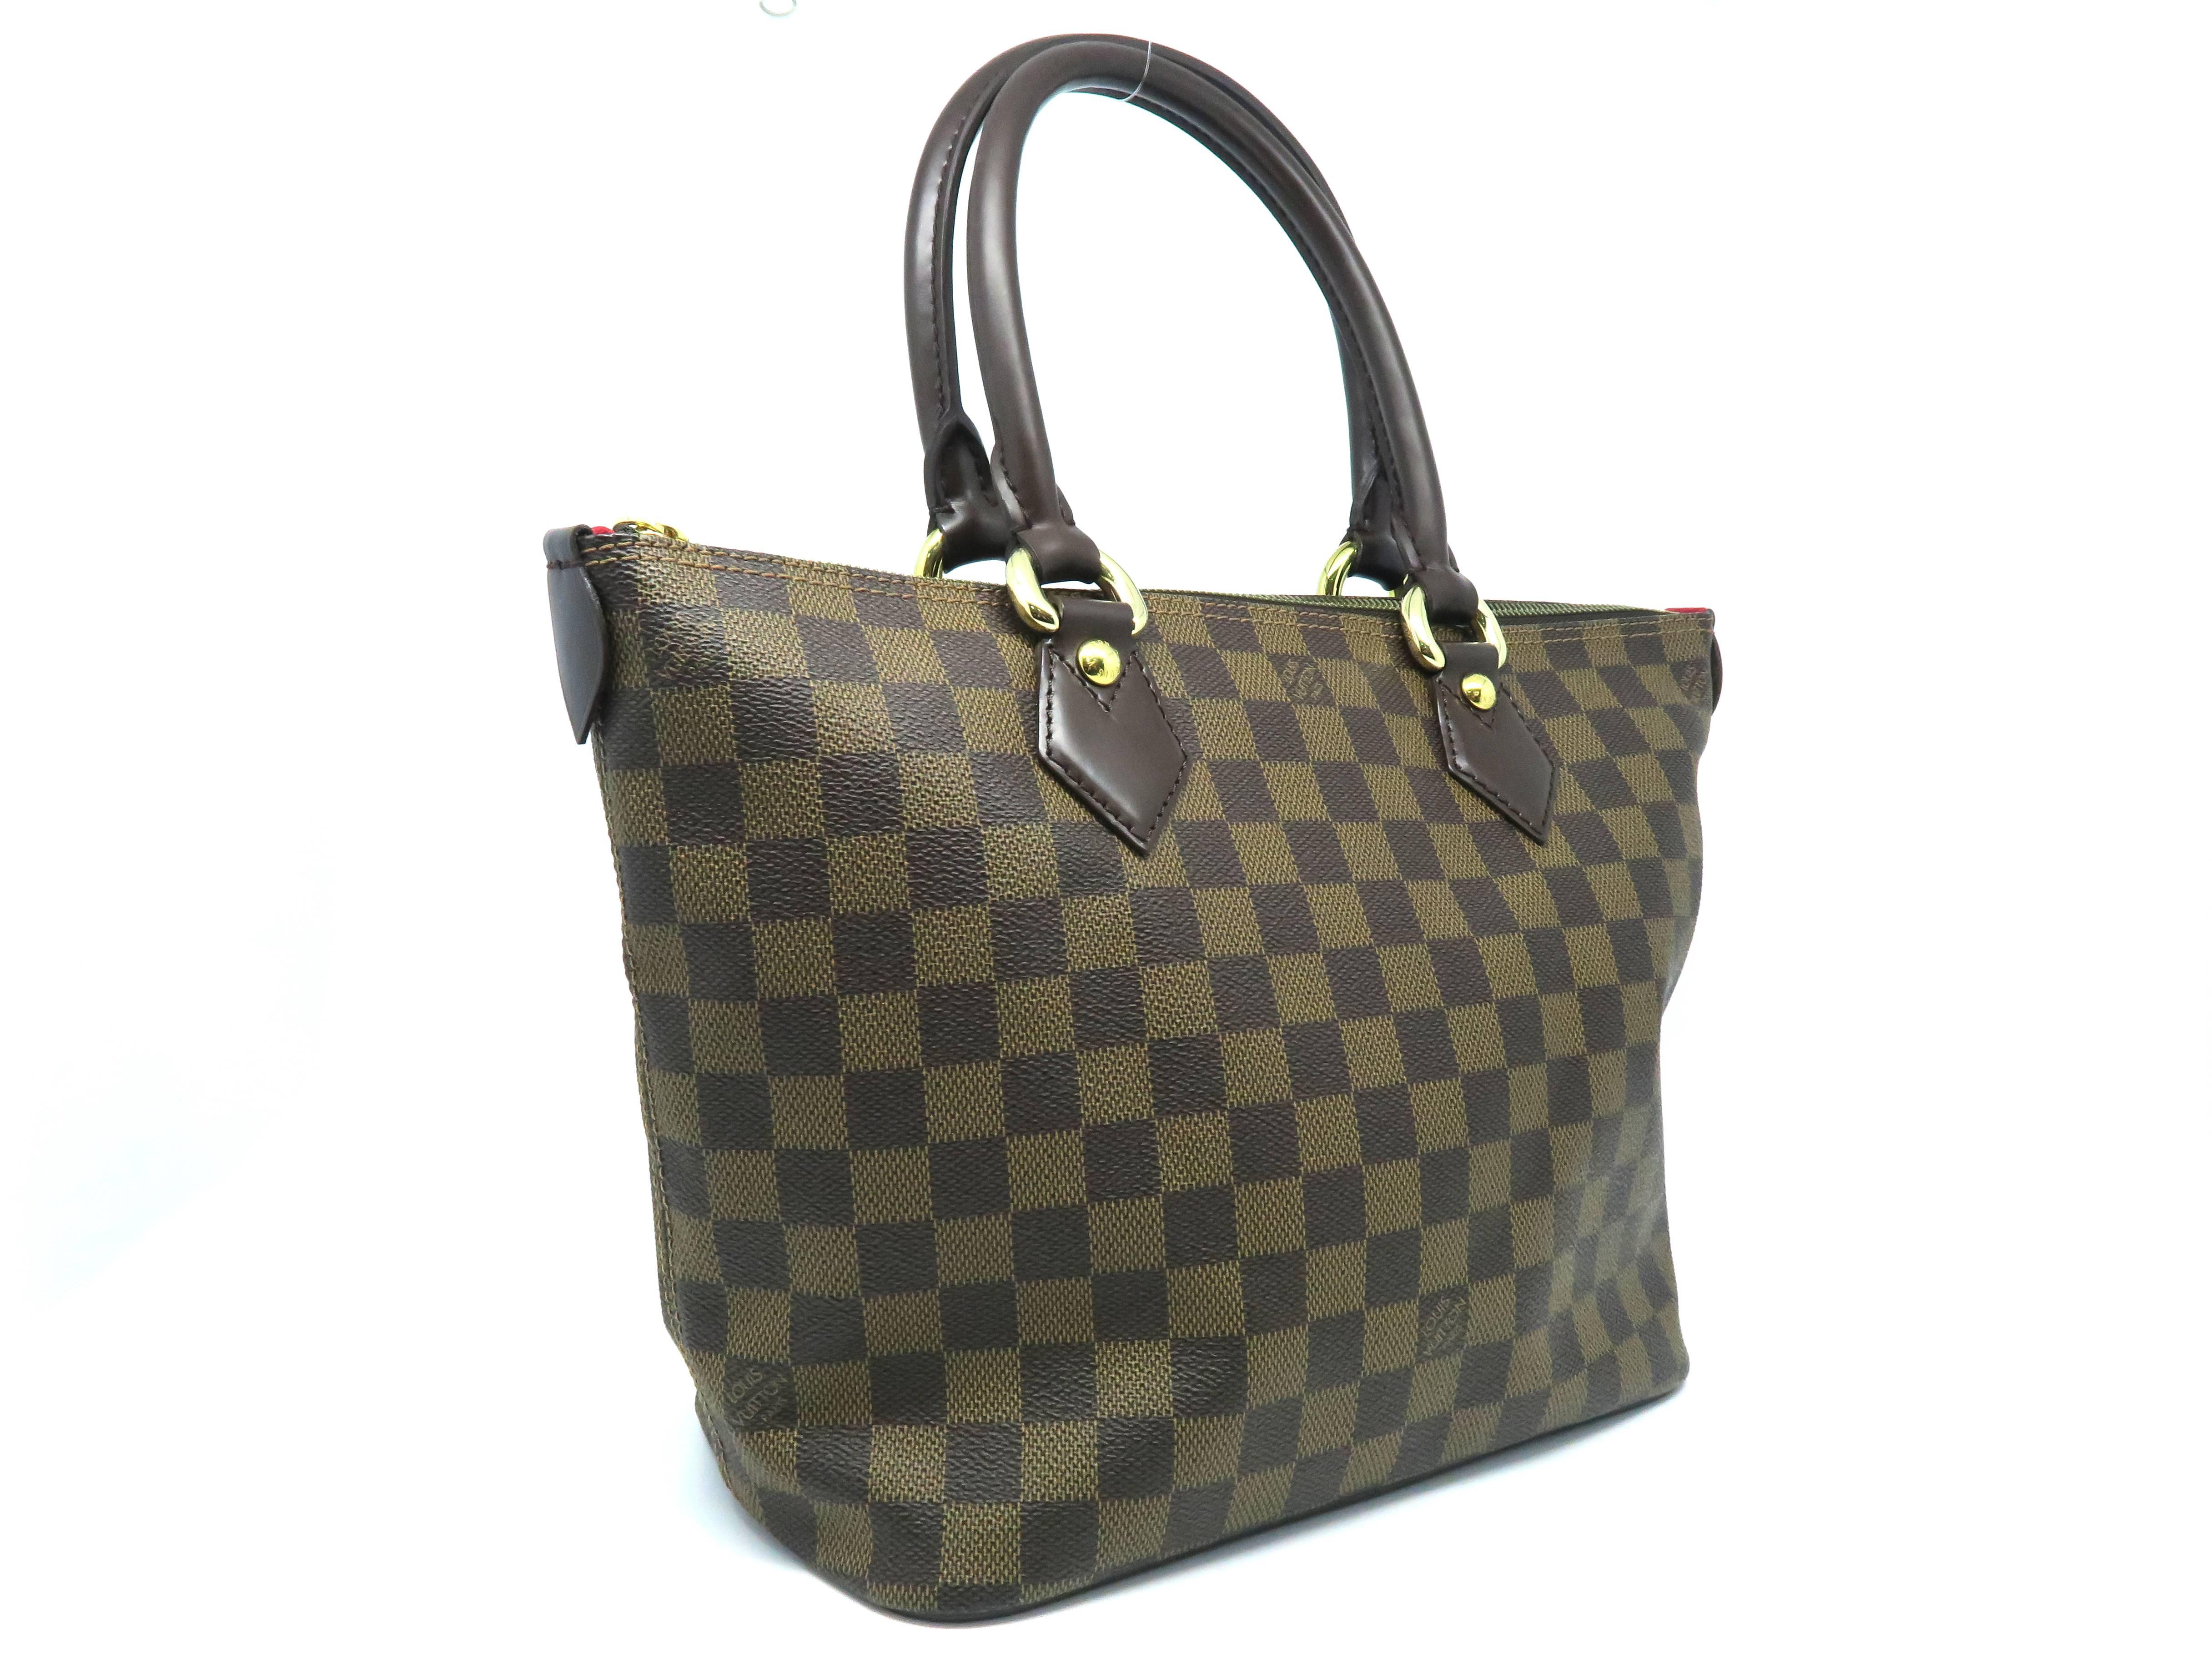 Color: Brown 

Material: Damier

Condition: Rank A 
Overall: Good, few minor defects
Surface: Minor Scratches
Corners: Minor Scratches
Edges: Good
Handles/Straps: Good
Hardware: Minor Scratches
Inside: Minor Stains

Dimension: W26 × H23 ×